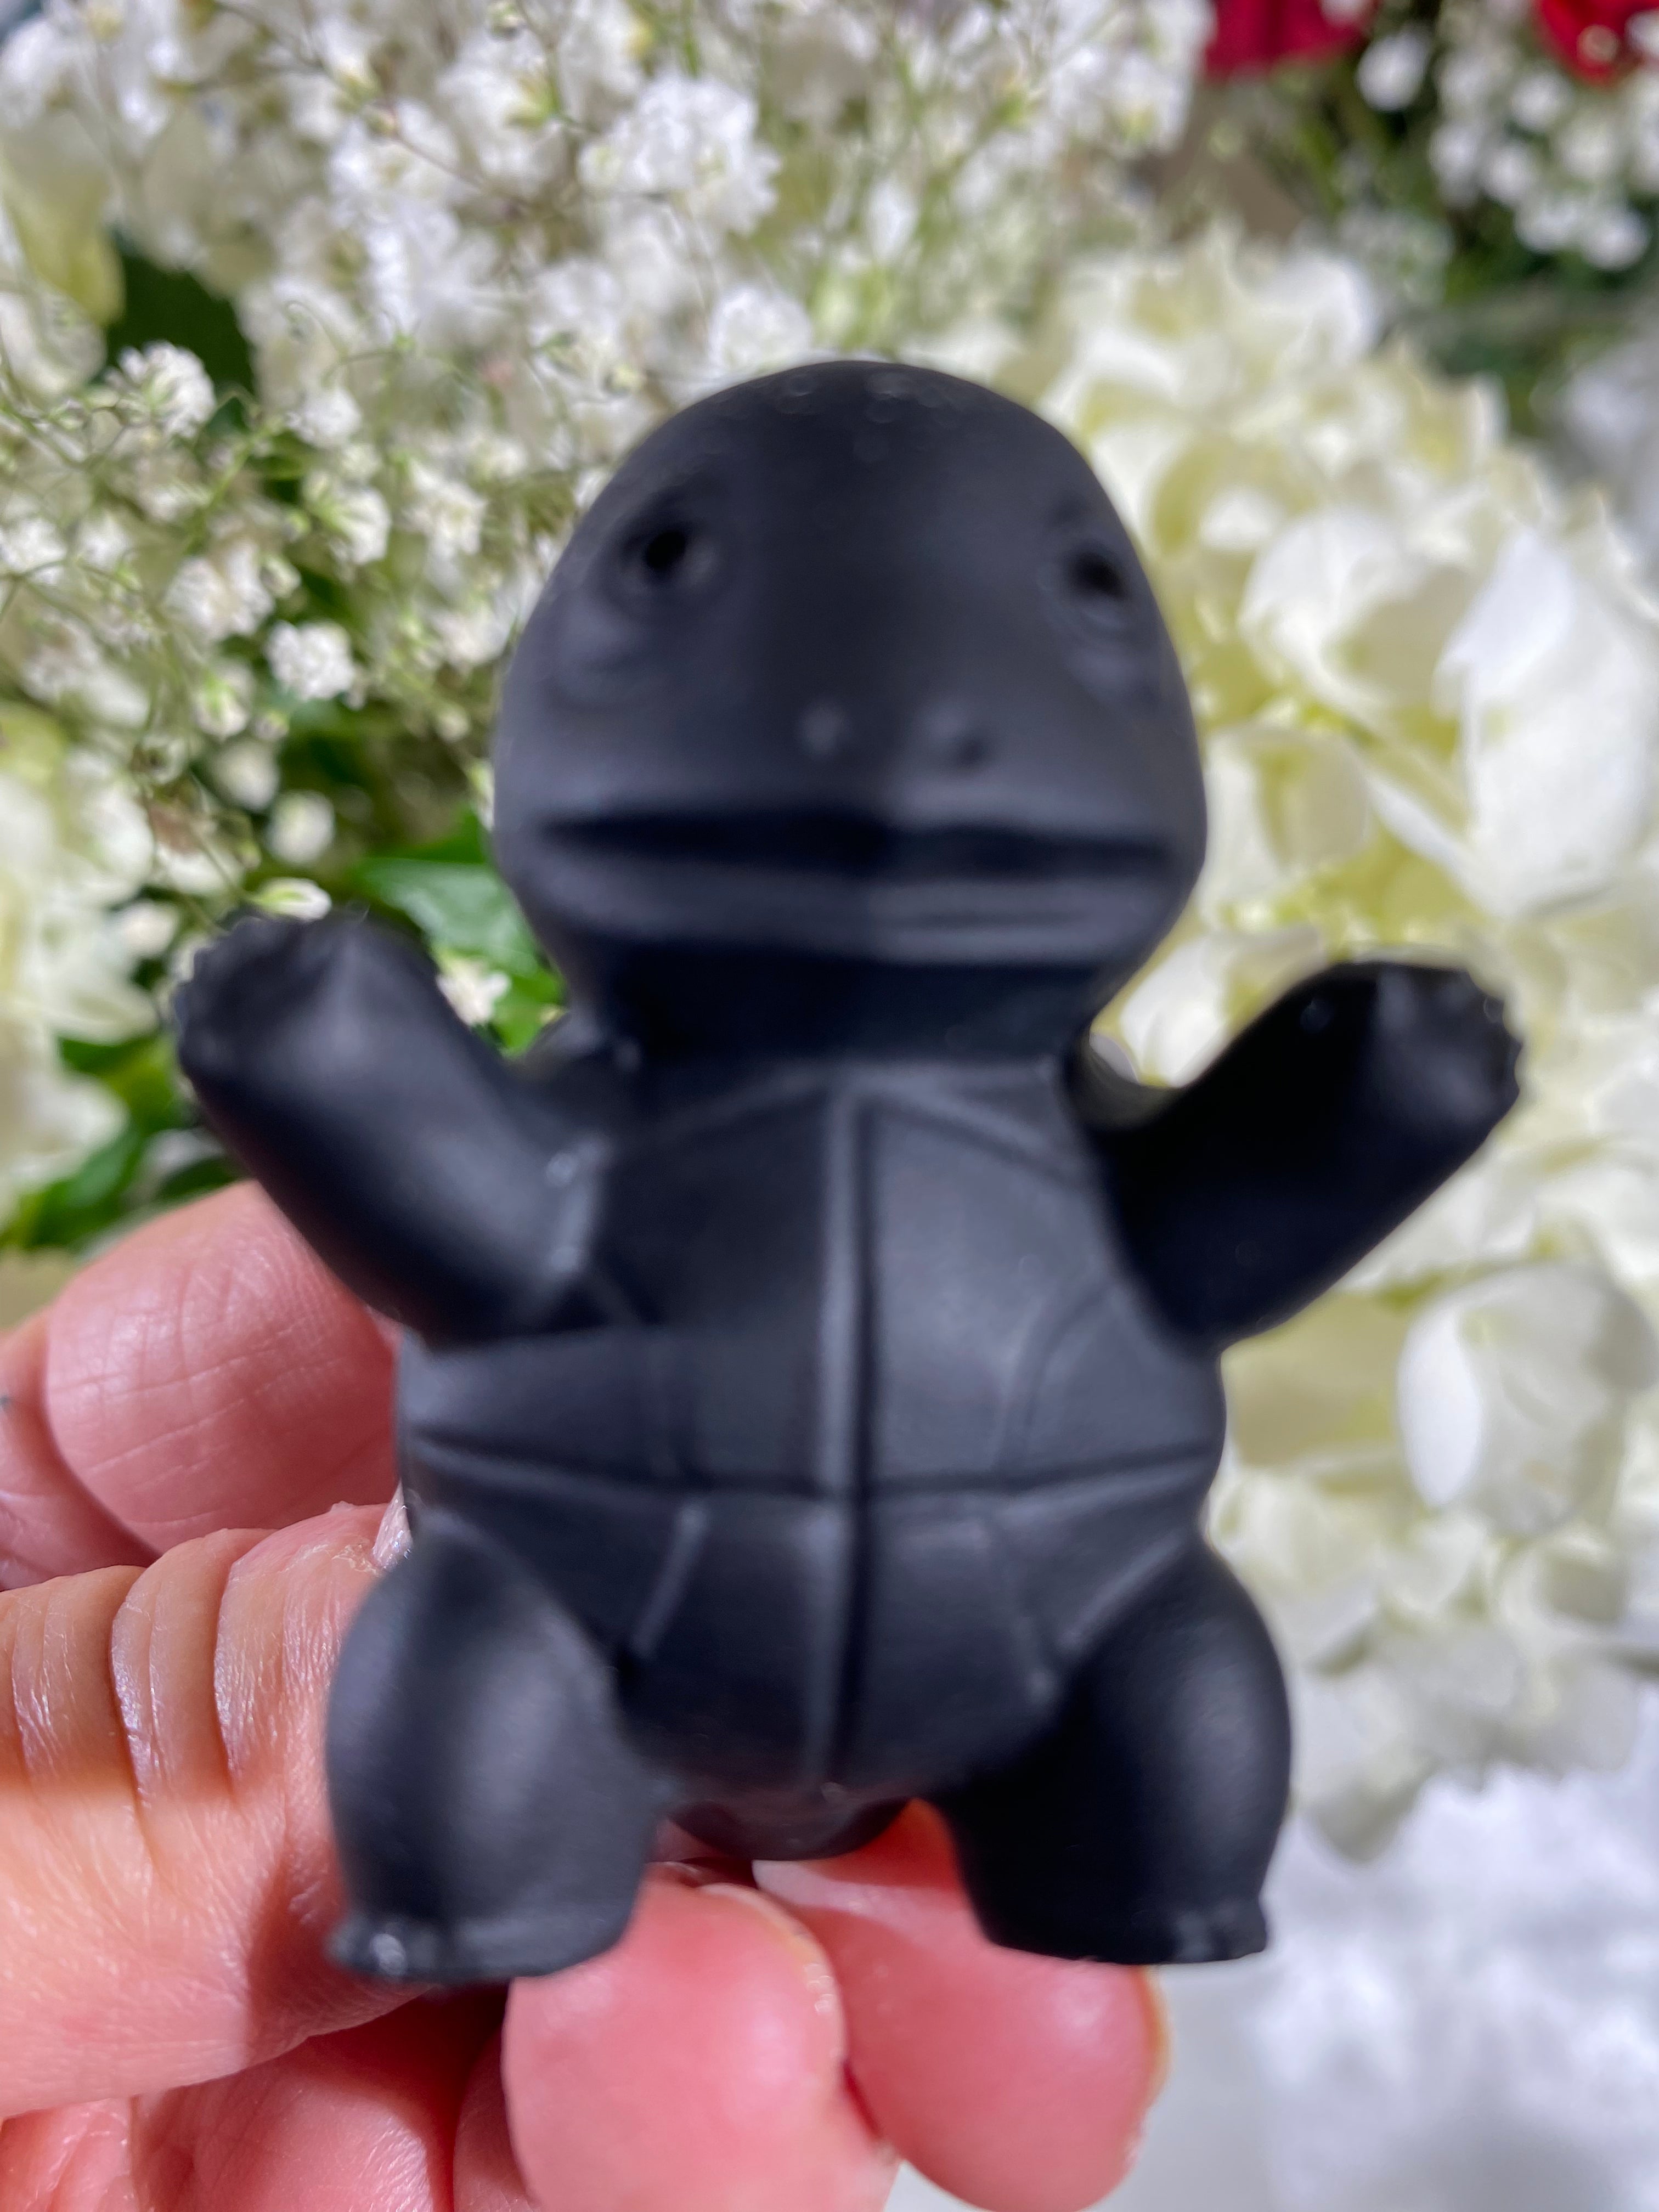 Self-Standing Obsidian Character Carving - Squirtle